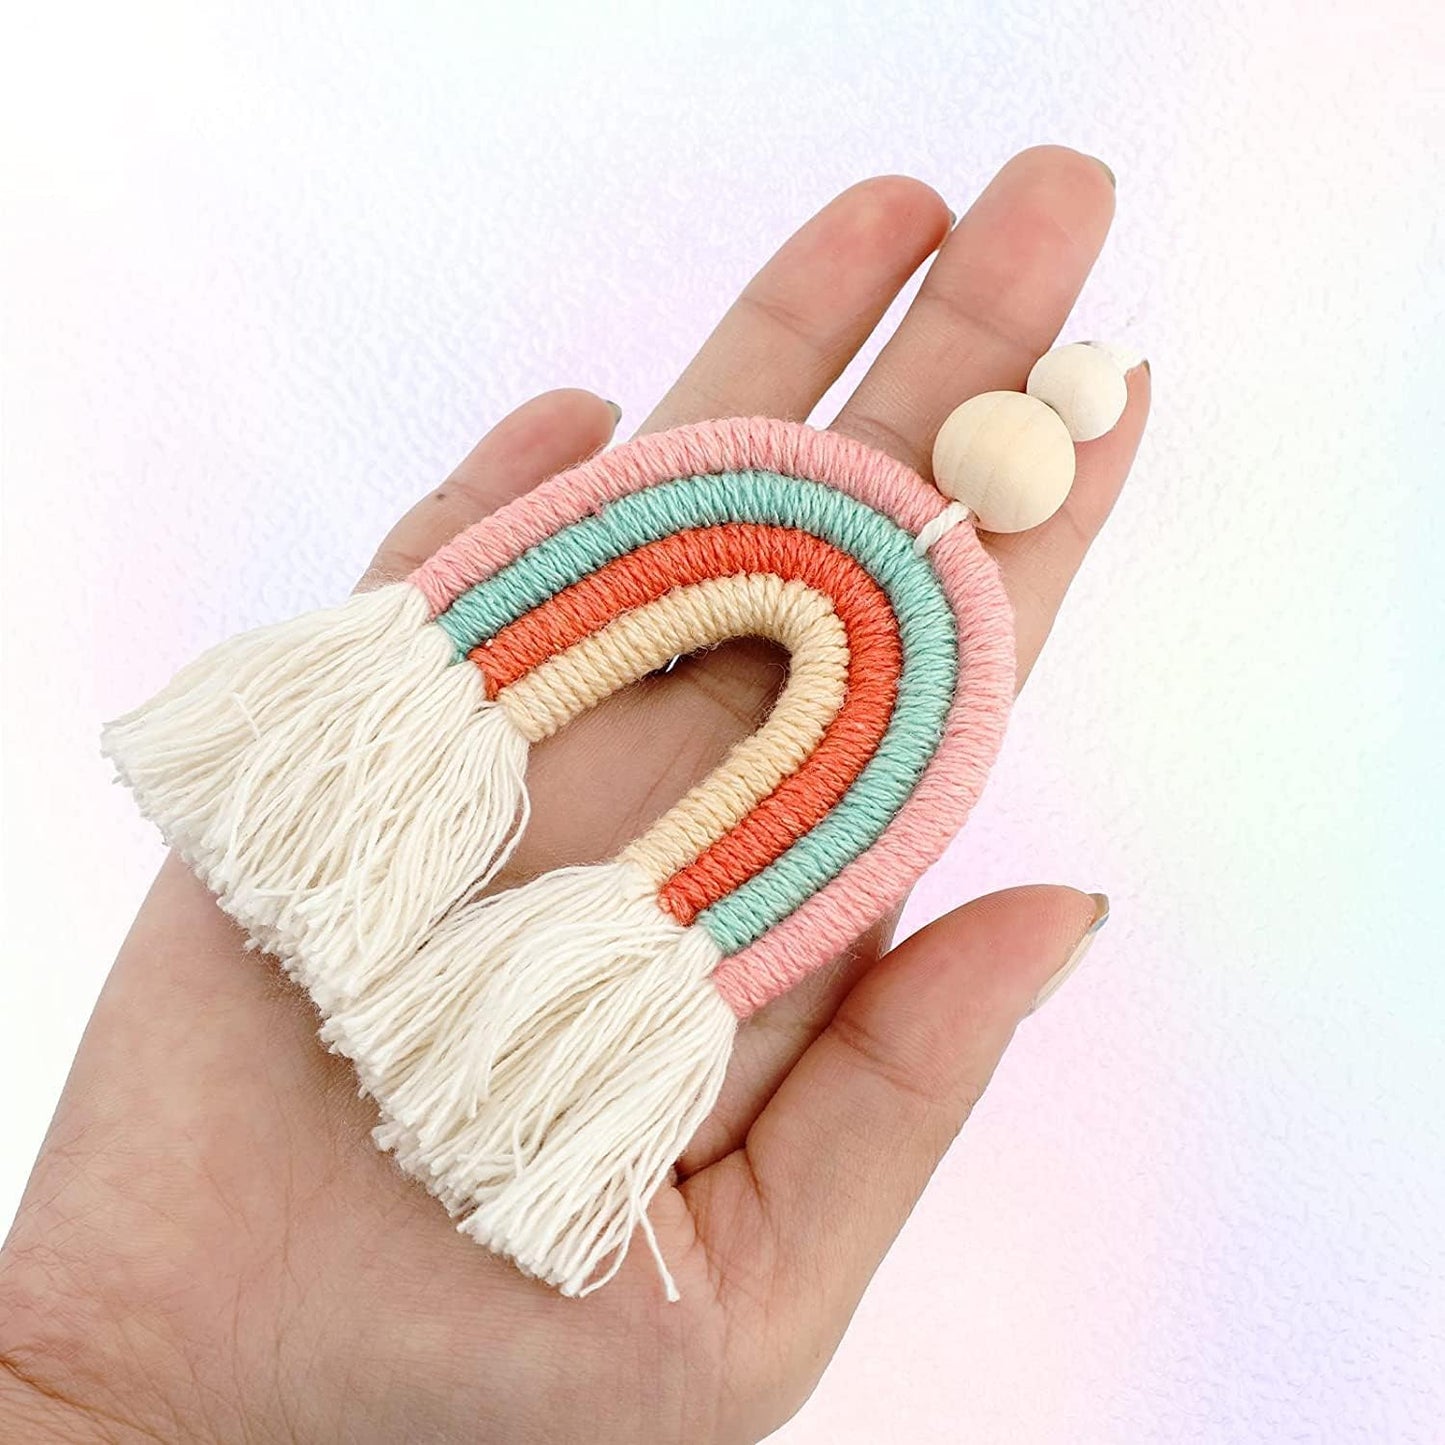 1 Pc Macrame Rainbow Handmade Car Charm Colorful Essential Oil Cars Diffuser Rear View Mirror Hanger with Wooden Beads for Home Wall Car Decoration (Color 1)